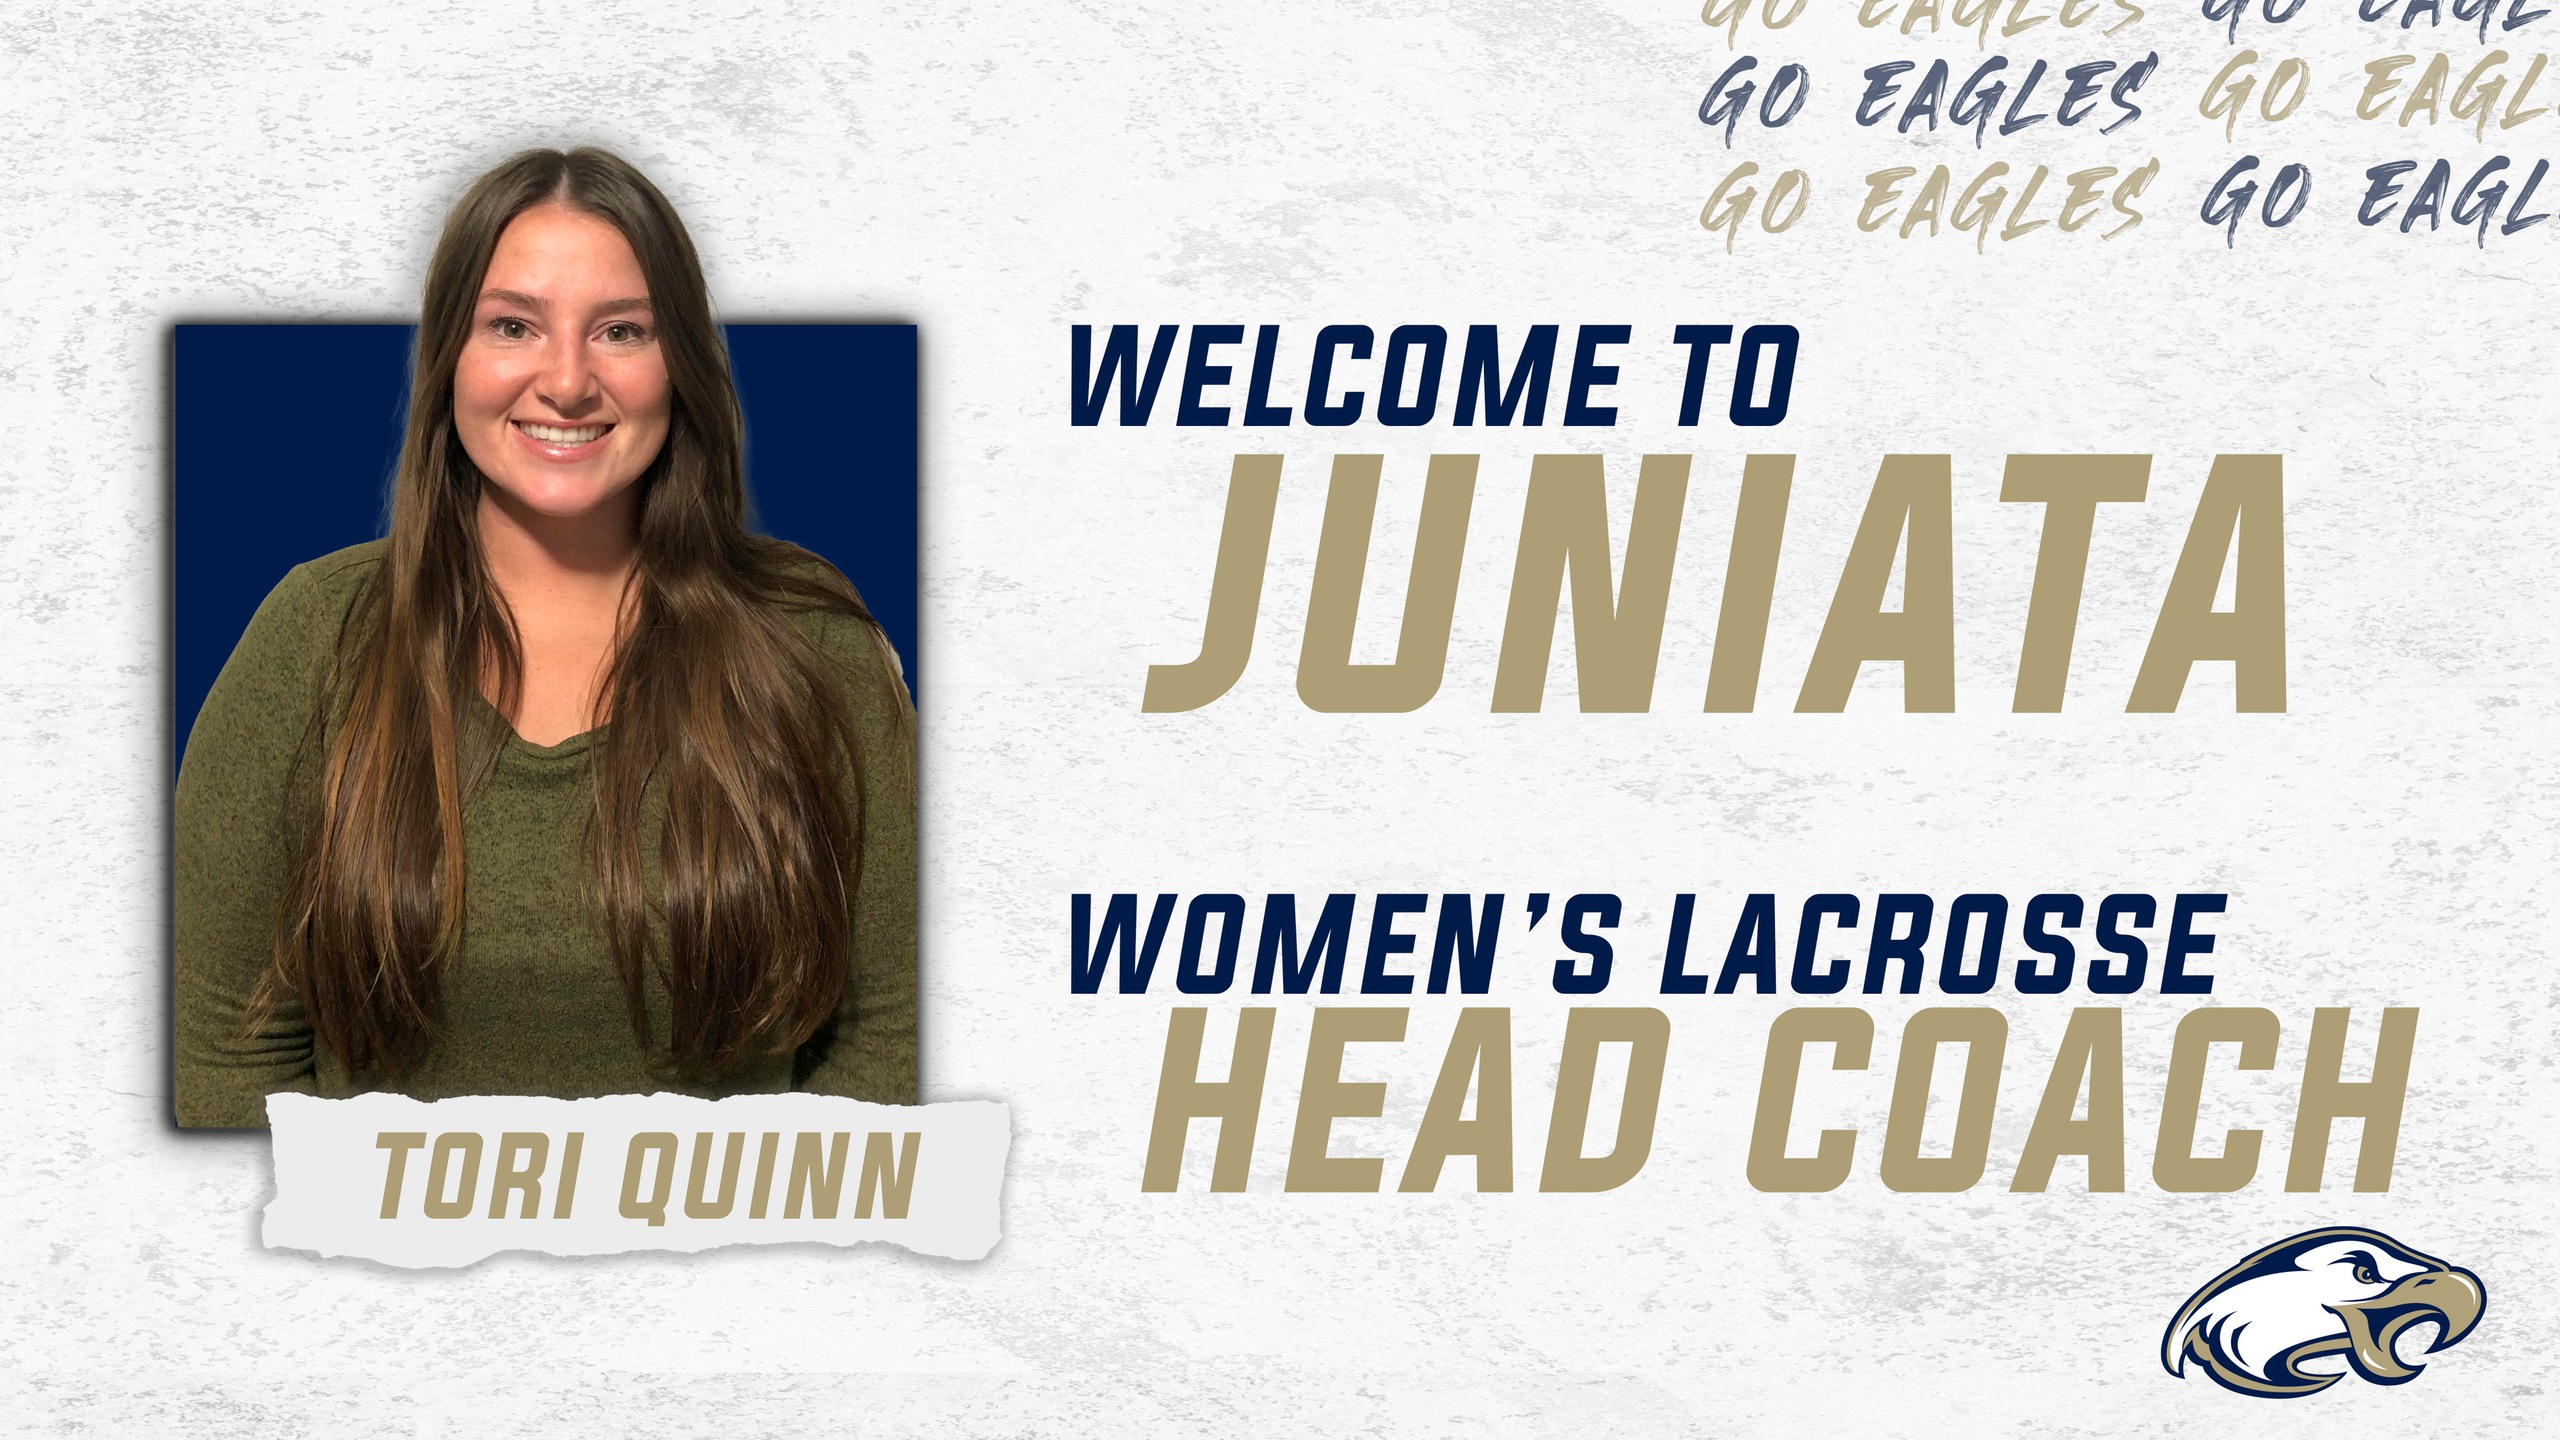 Quinn Tabbed to be Next Women's Lacrosse Coach at Juniata